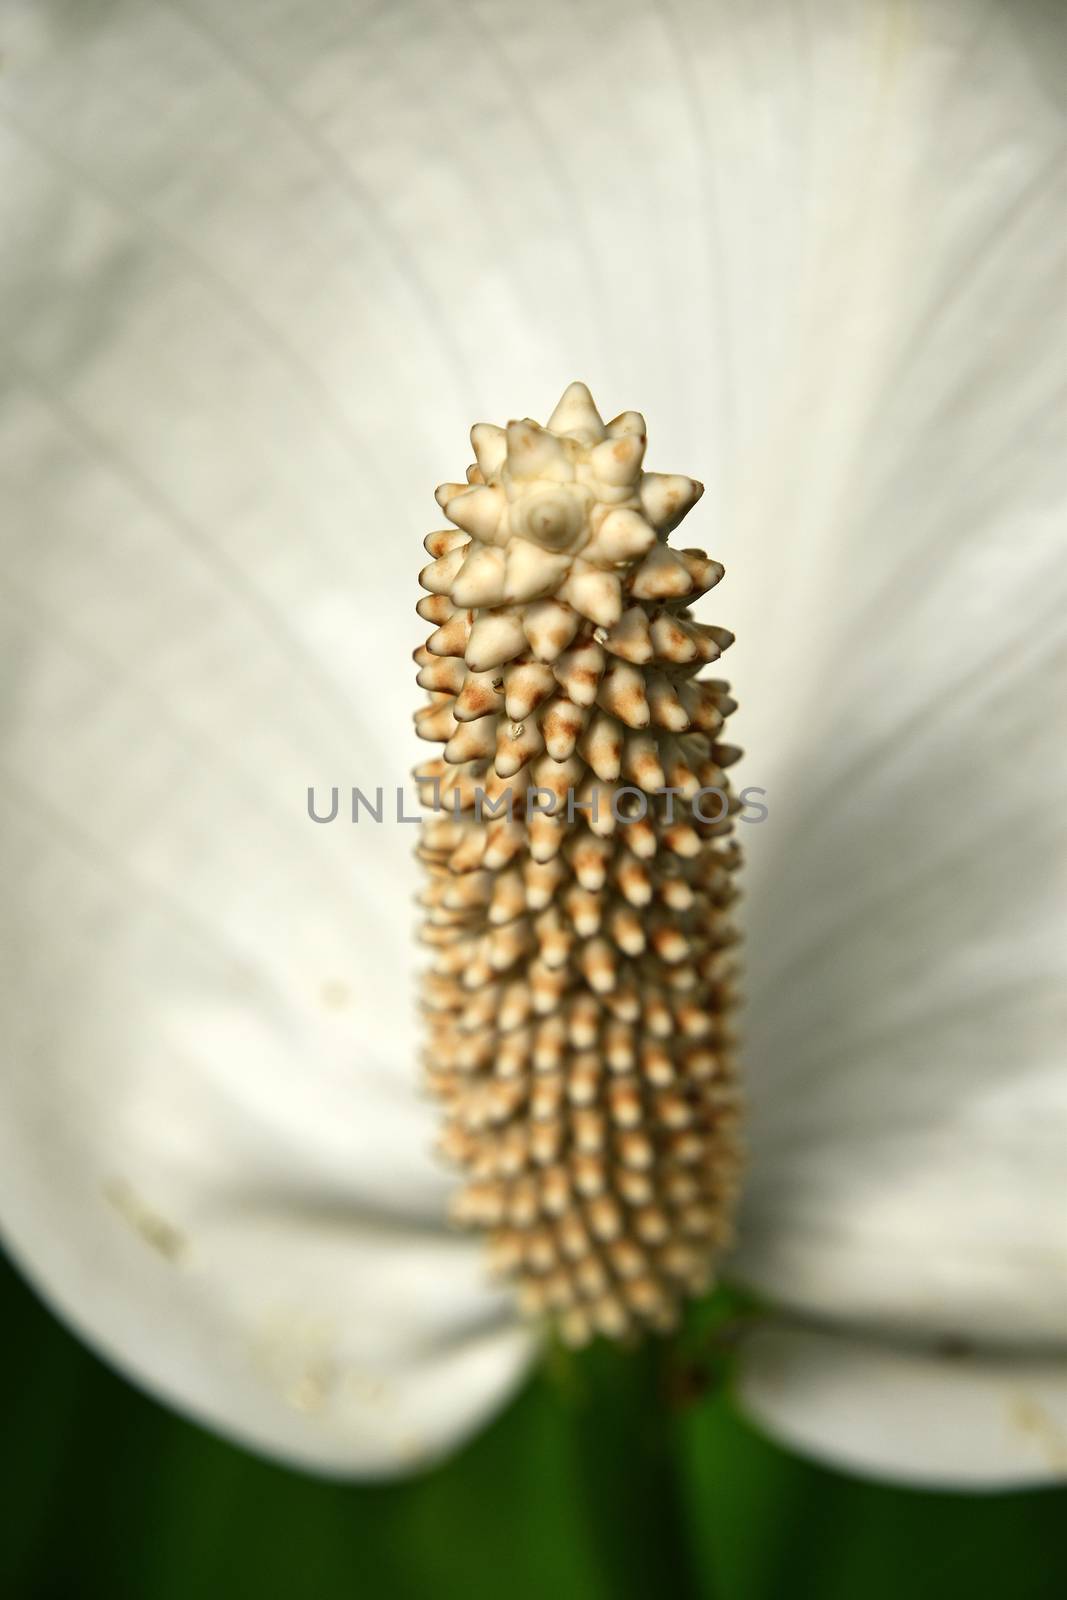 Close up one white tropical Spathiphyllum flower with spadix and spathe, epiphyte of Araceae family also known as spath or peace lilies